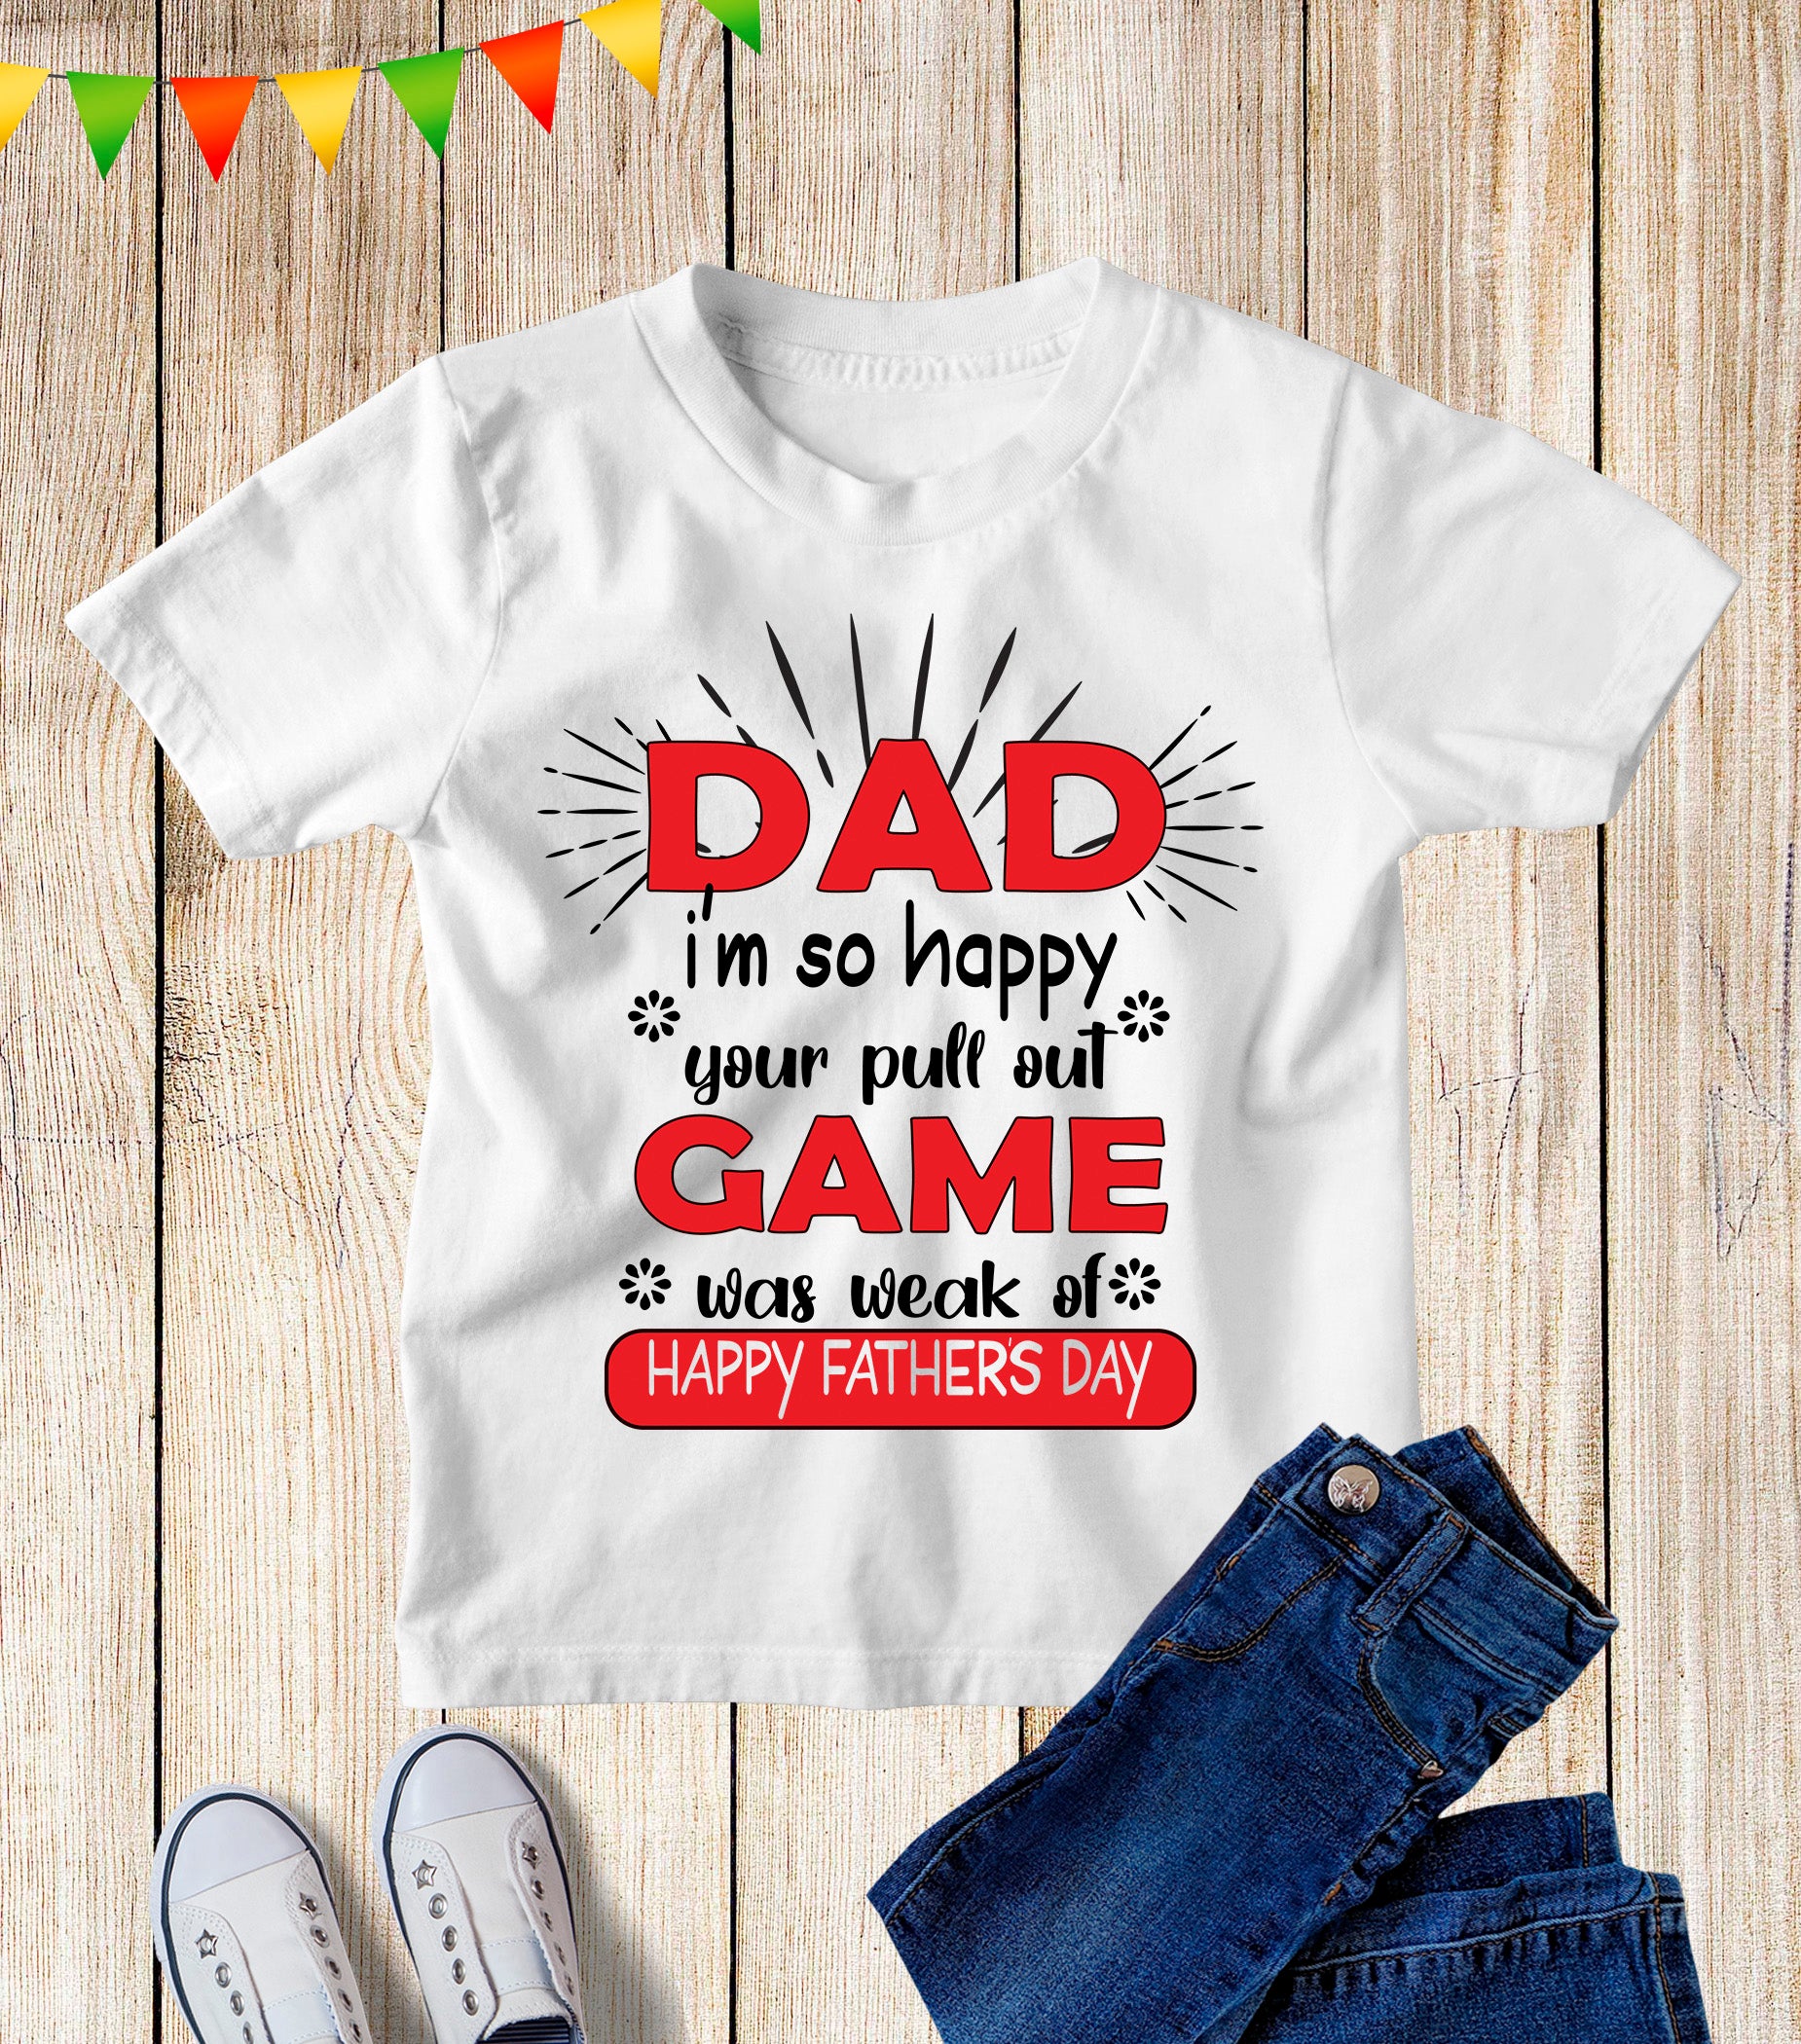 Dad I'm So Happy Your Pull Out Game Was weak Of Happy Fathers Day Kids T Shirt